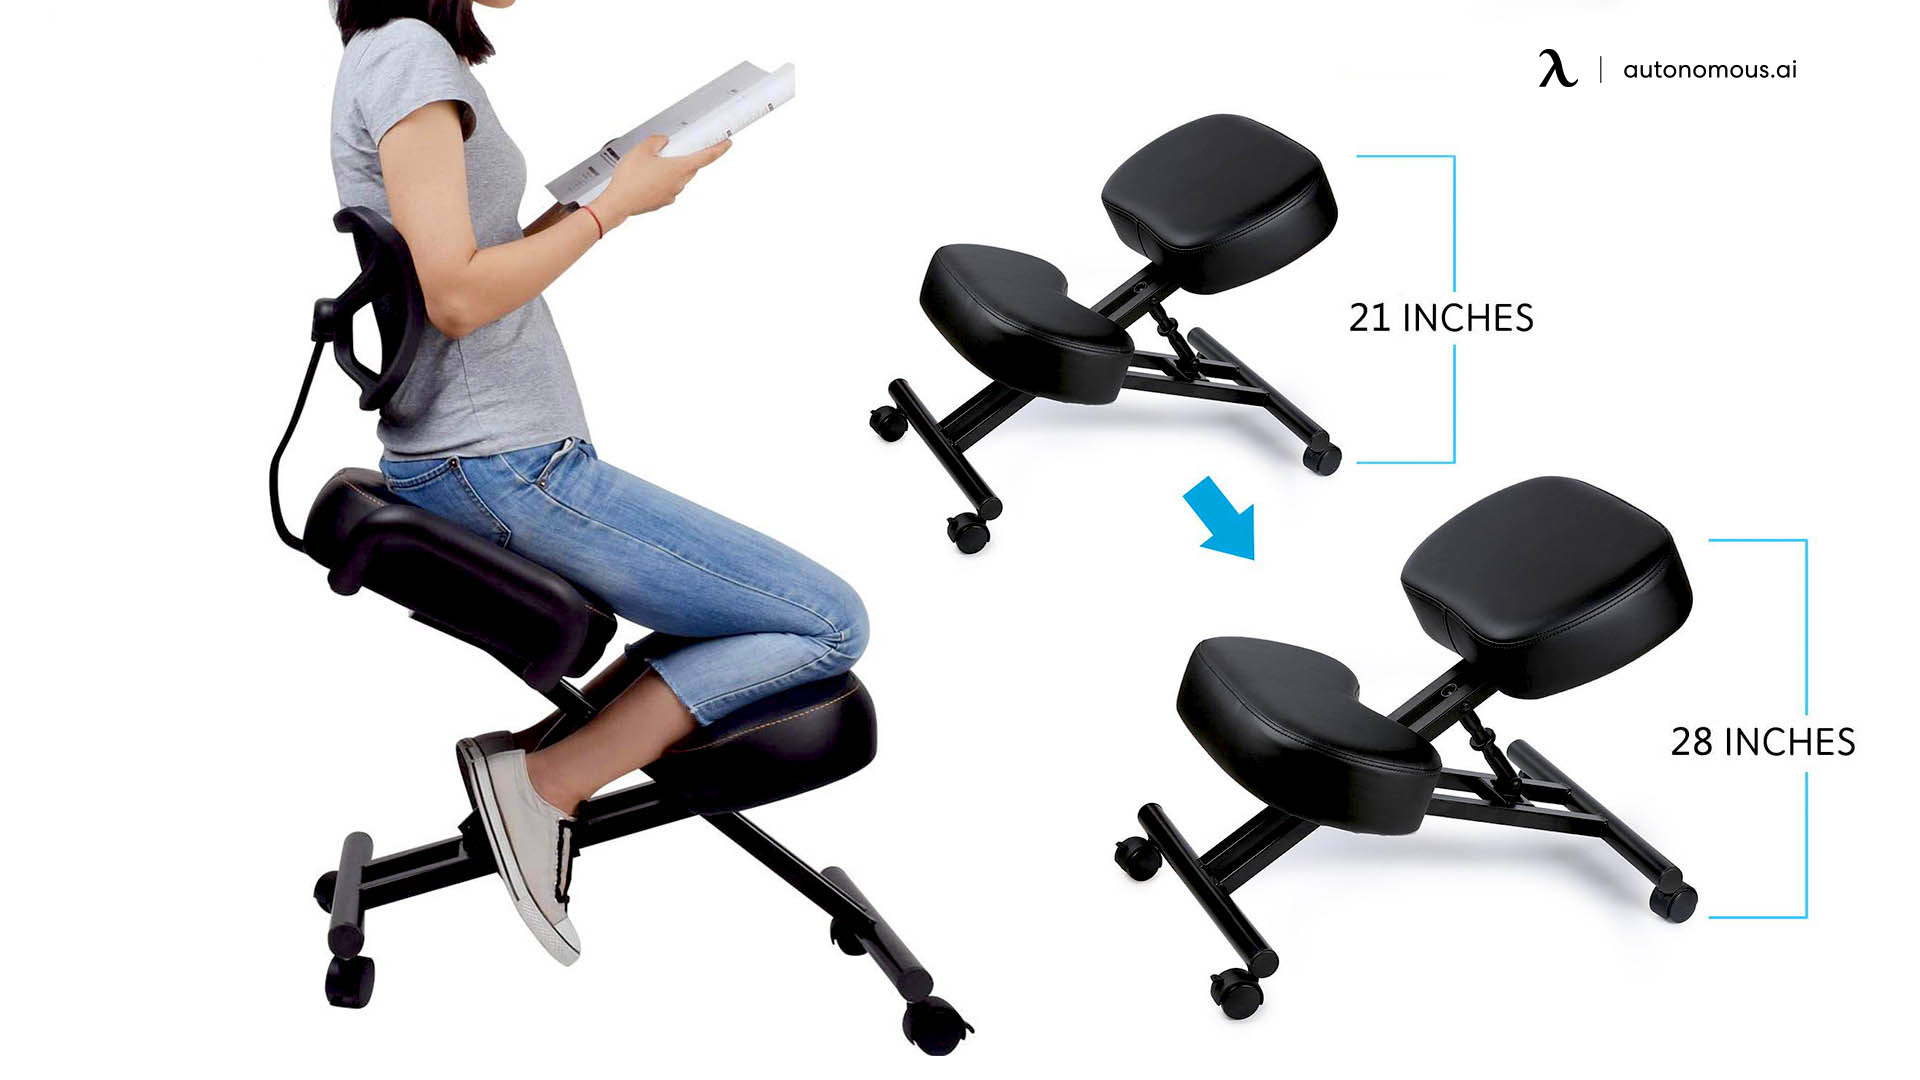 Kneeling Chairs for active sitting